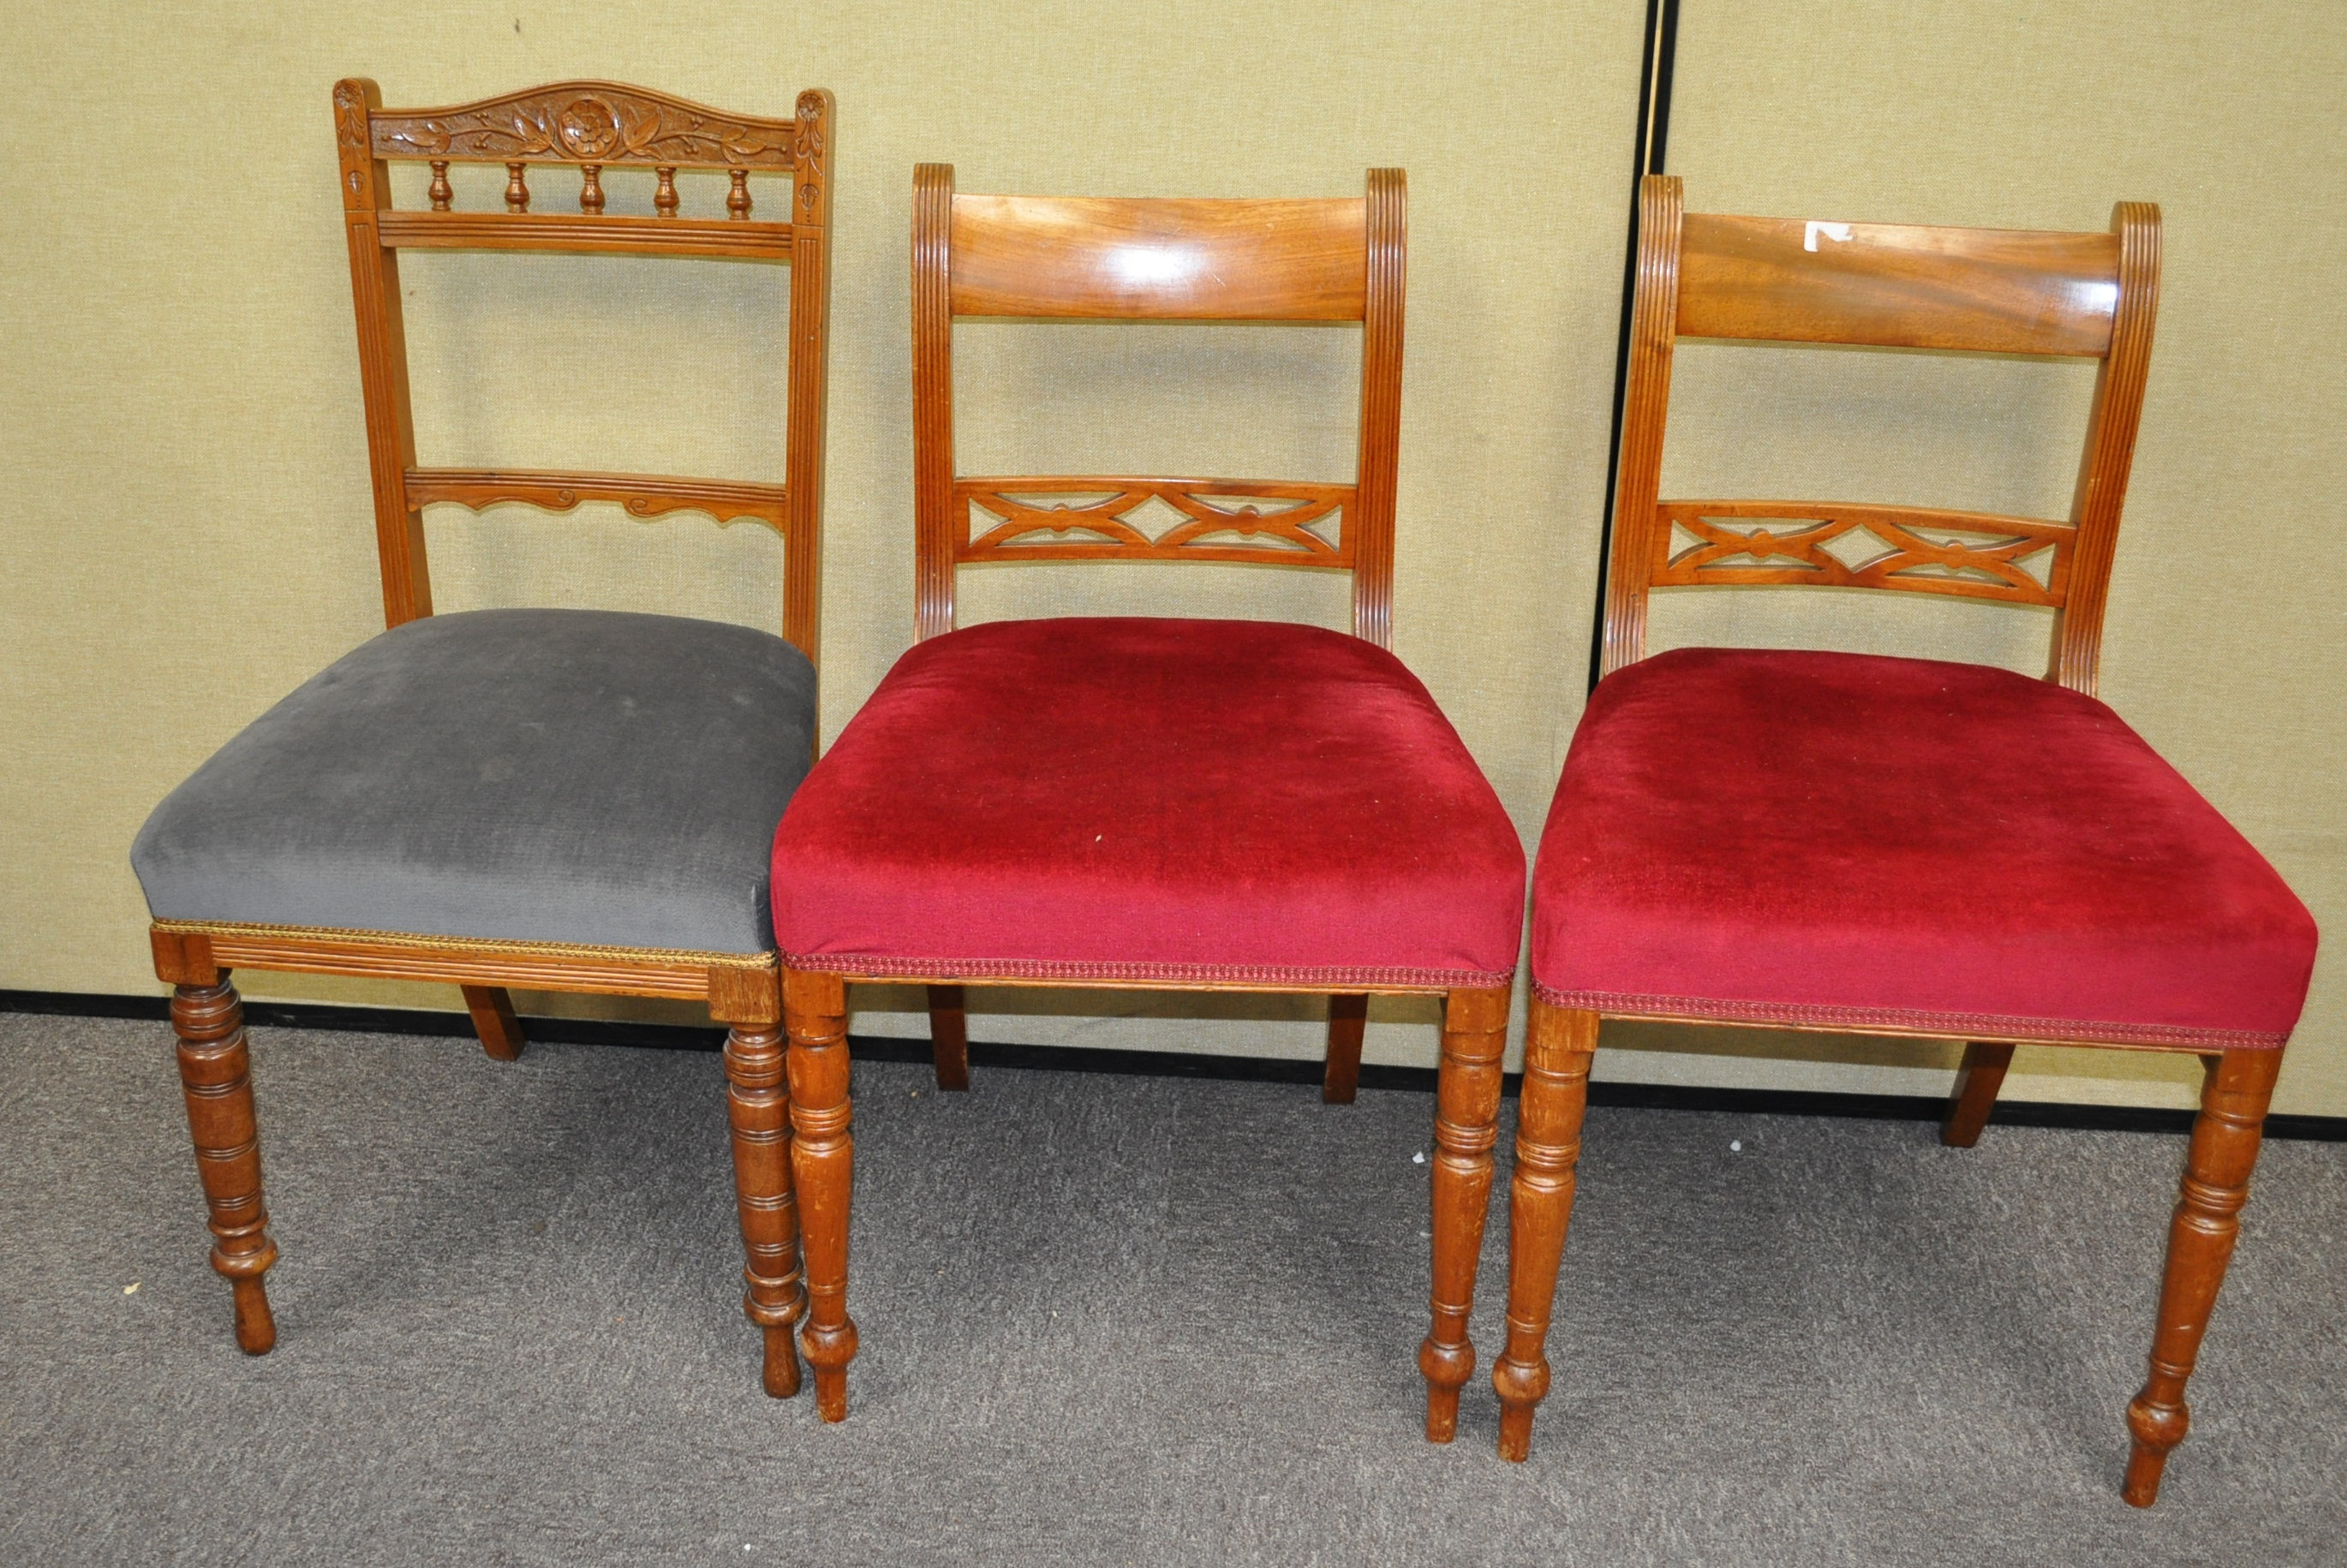 A Victorian mahogany dining chair and a pair of mahogany dining chairs - Image 2 of 2